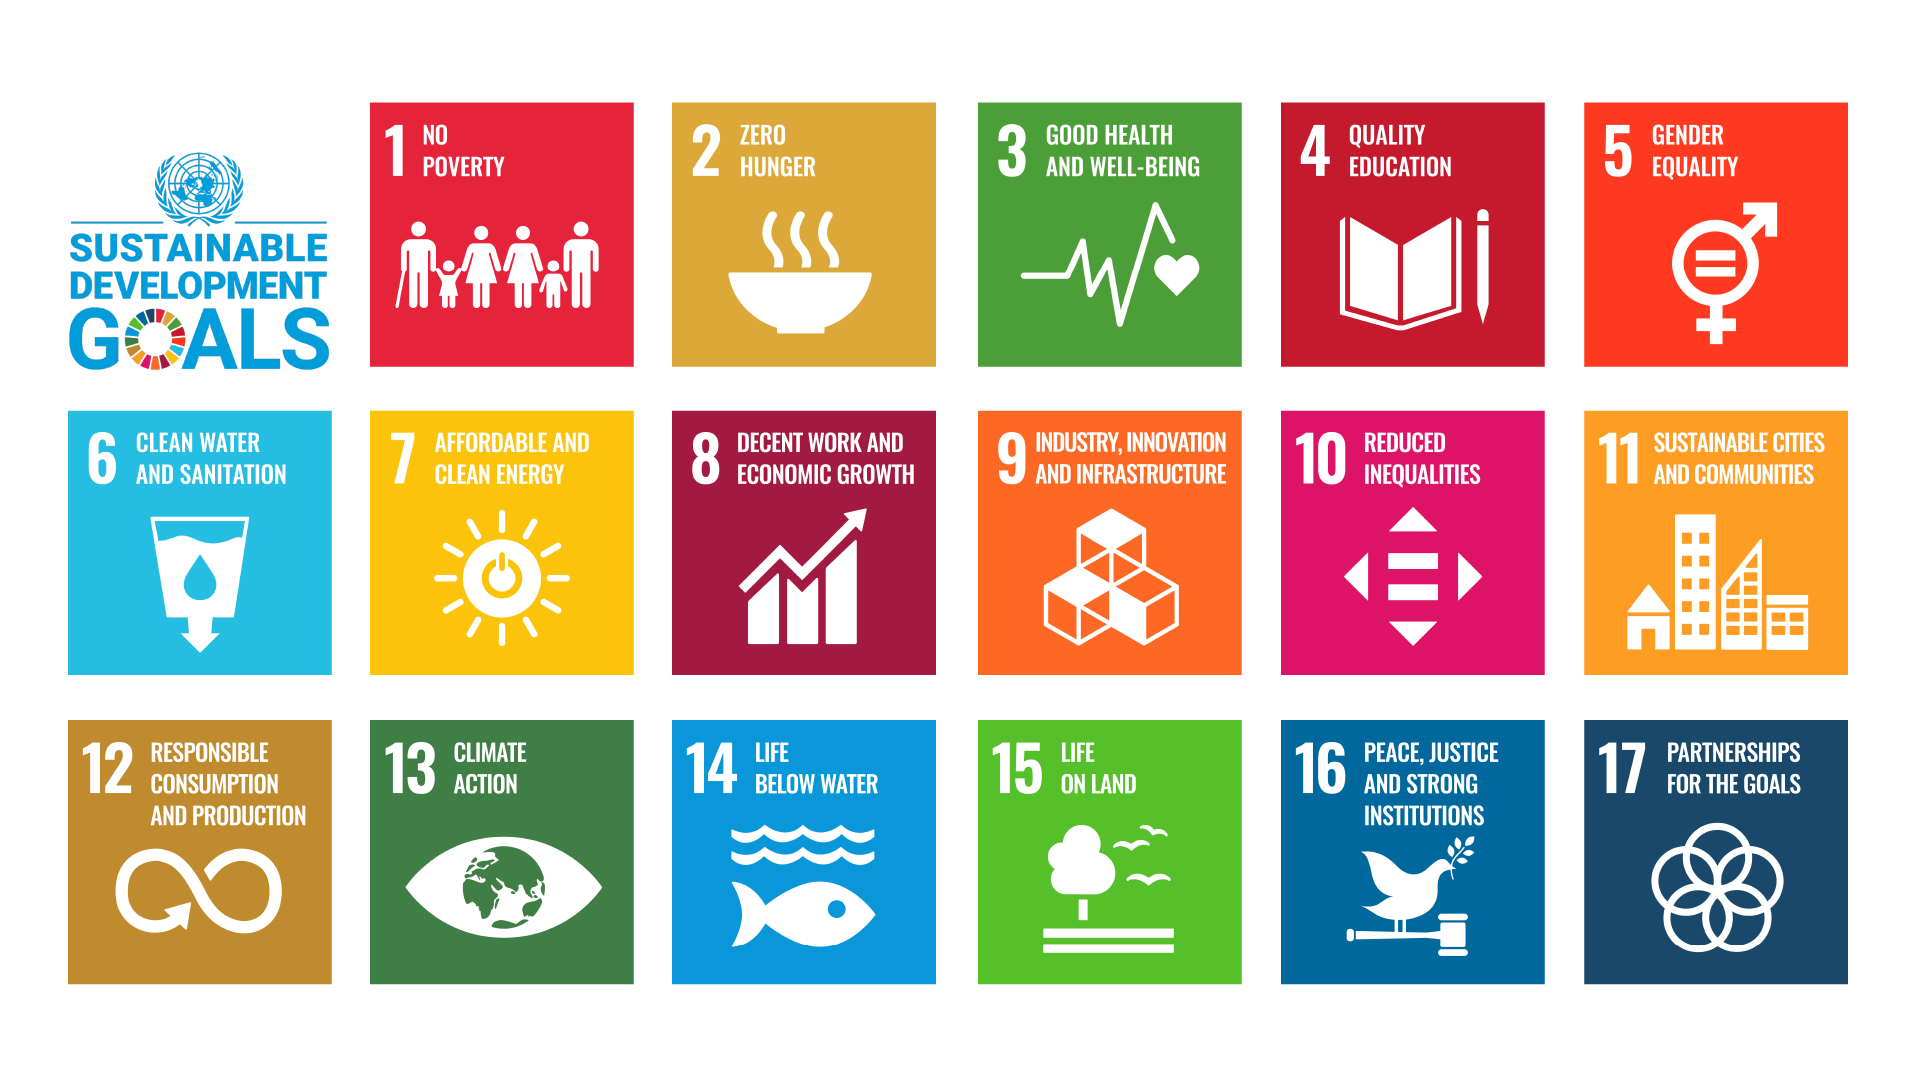 Aligned with the SDG objectives